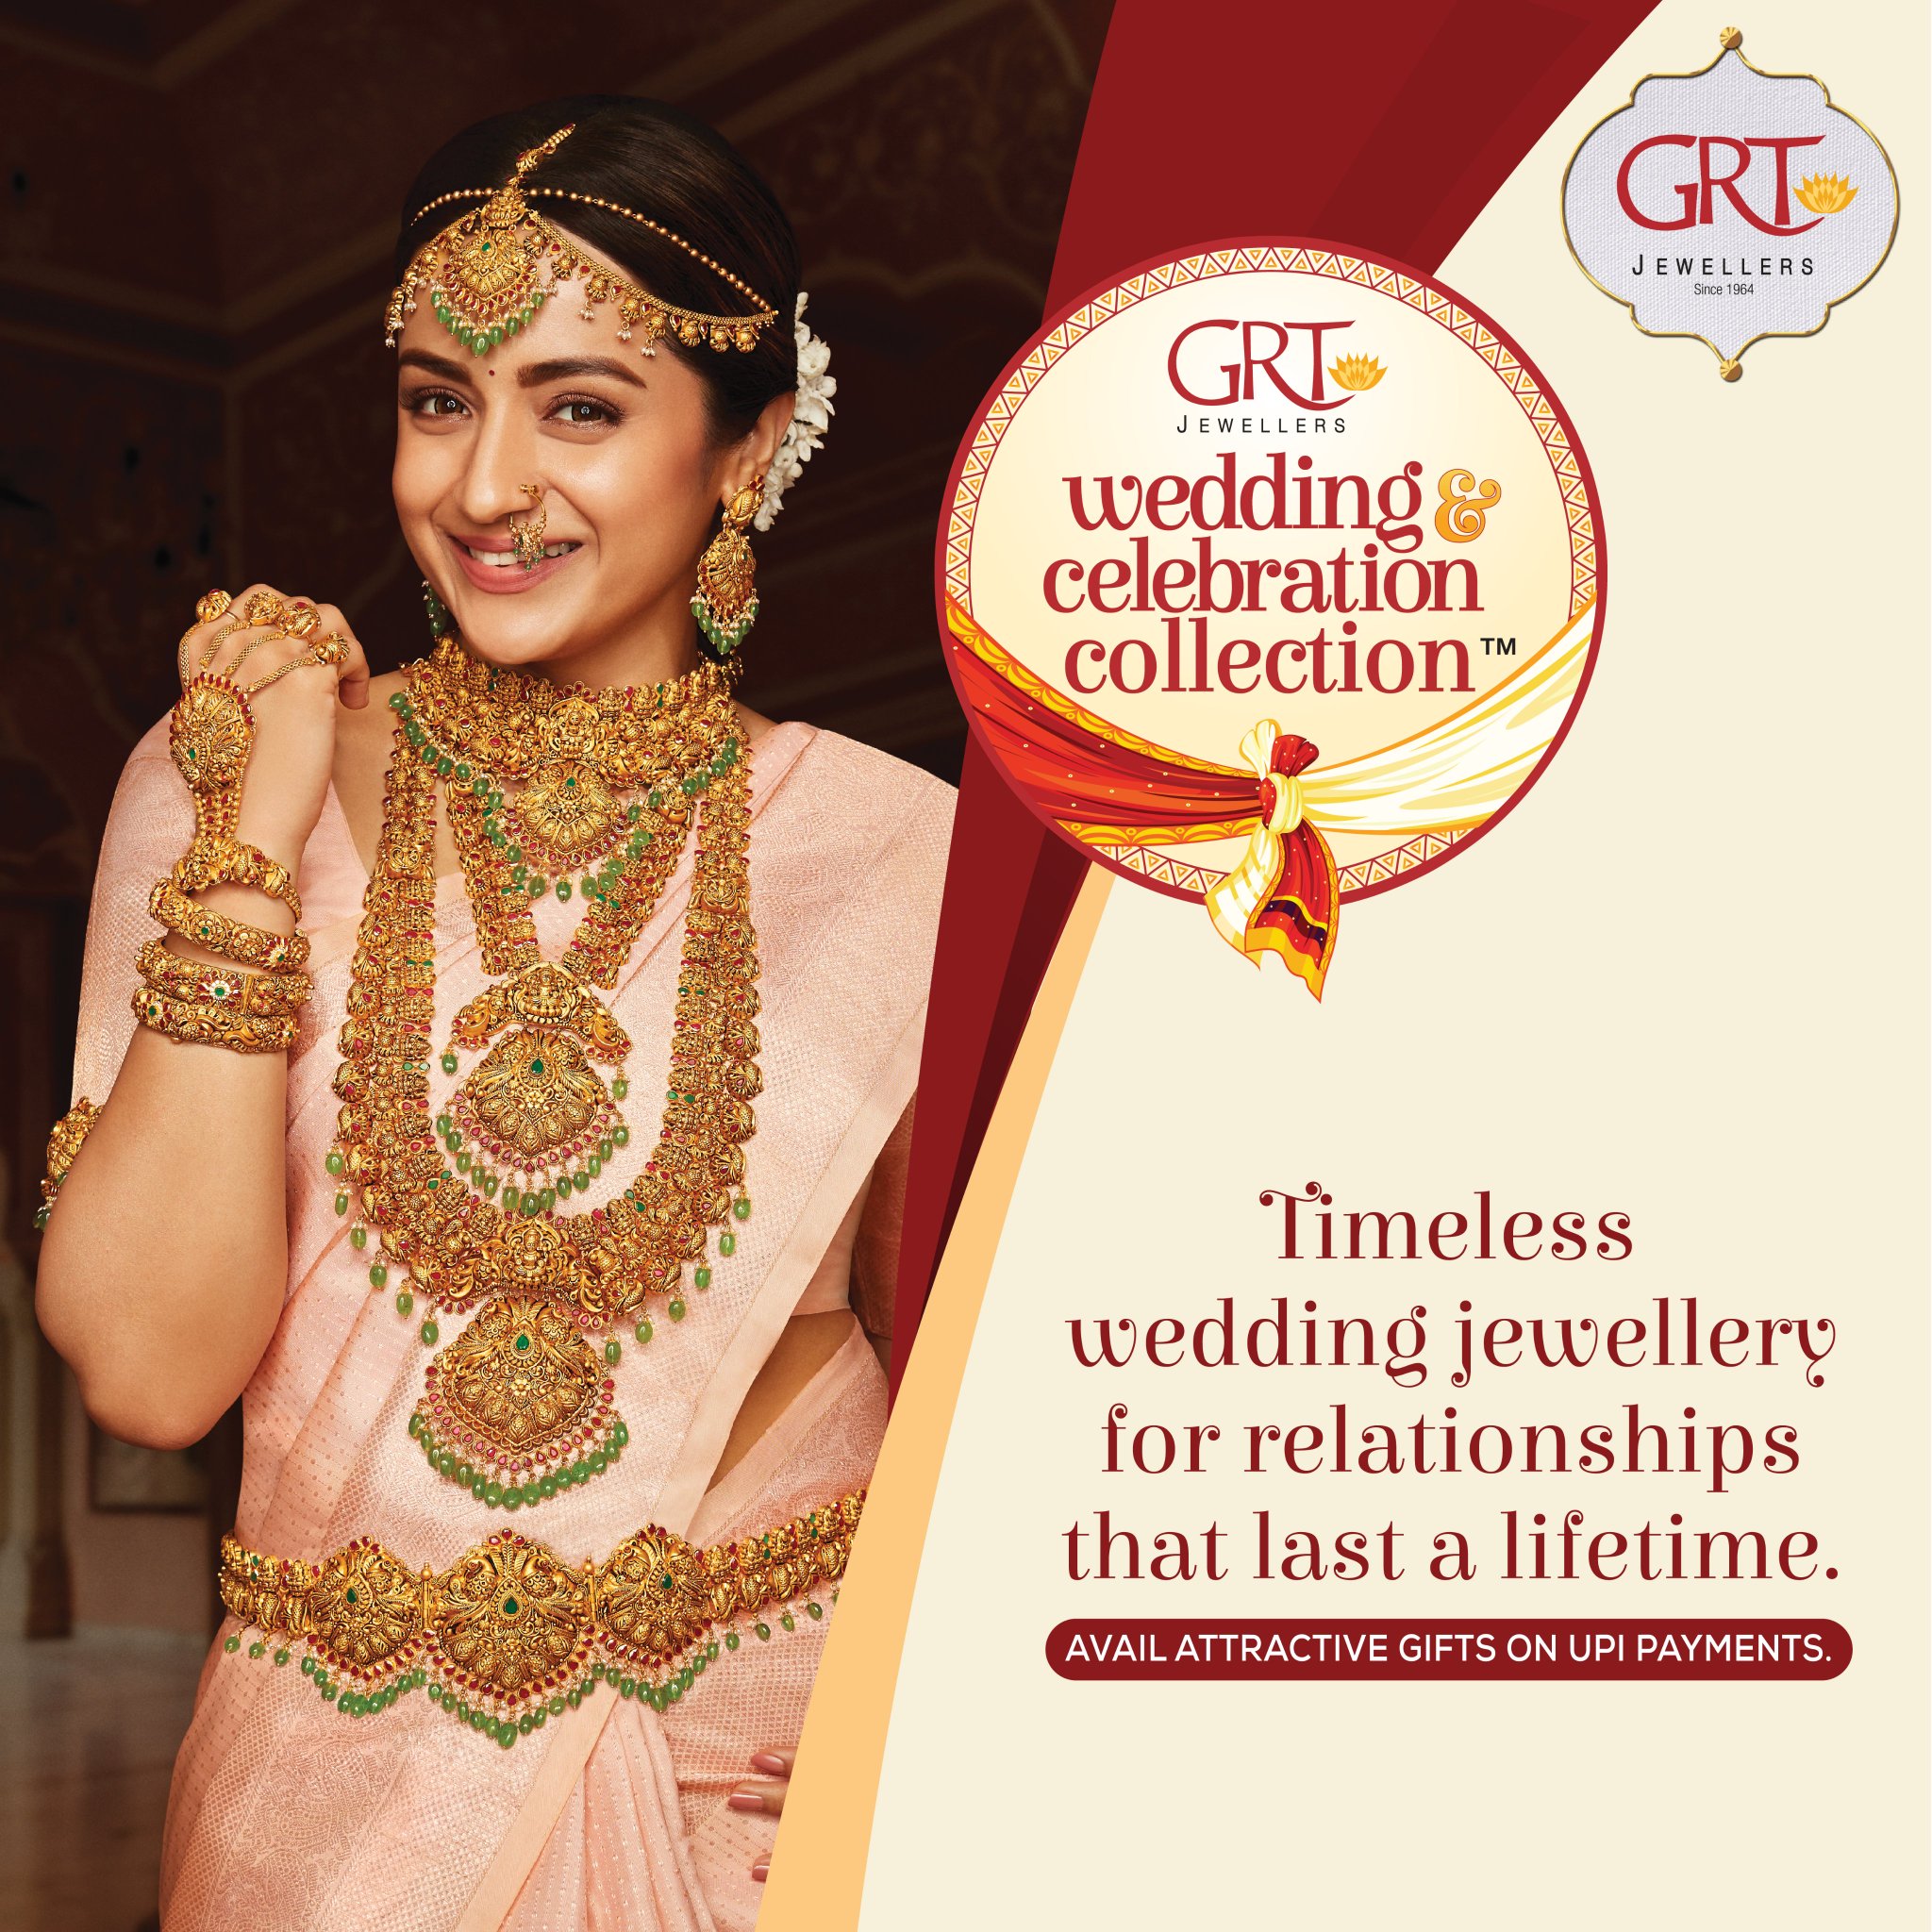 Grand Gold Necklace From GRT Jewellers - South India Jewels | Necklace  designs, Gold necklace indian bridal jewelry, Temple jewellery earrings